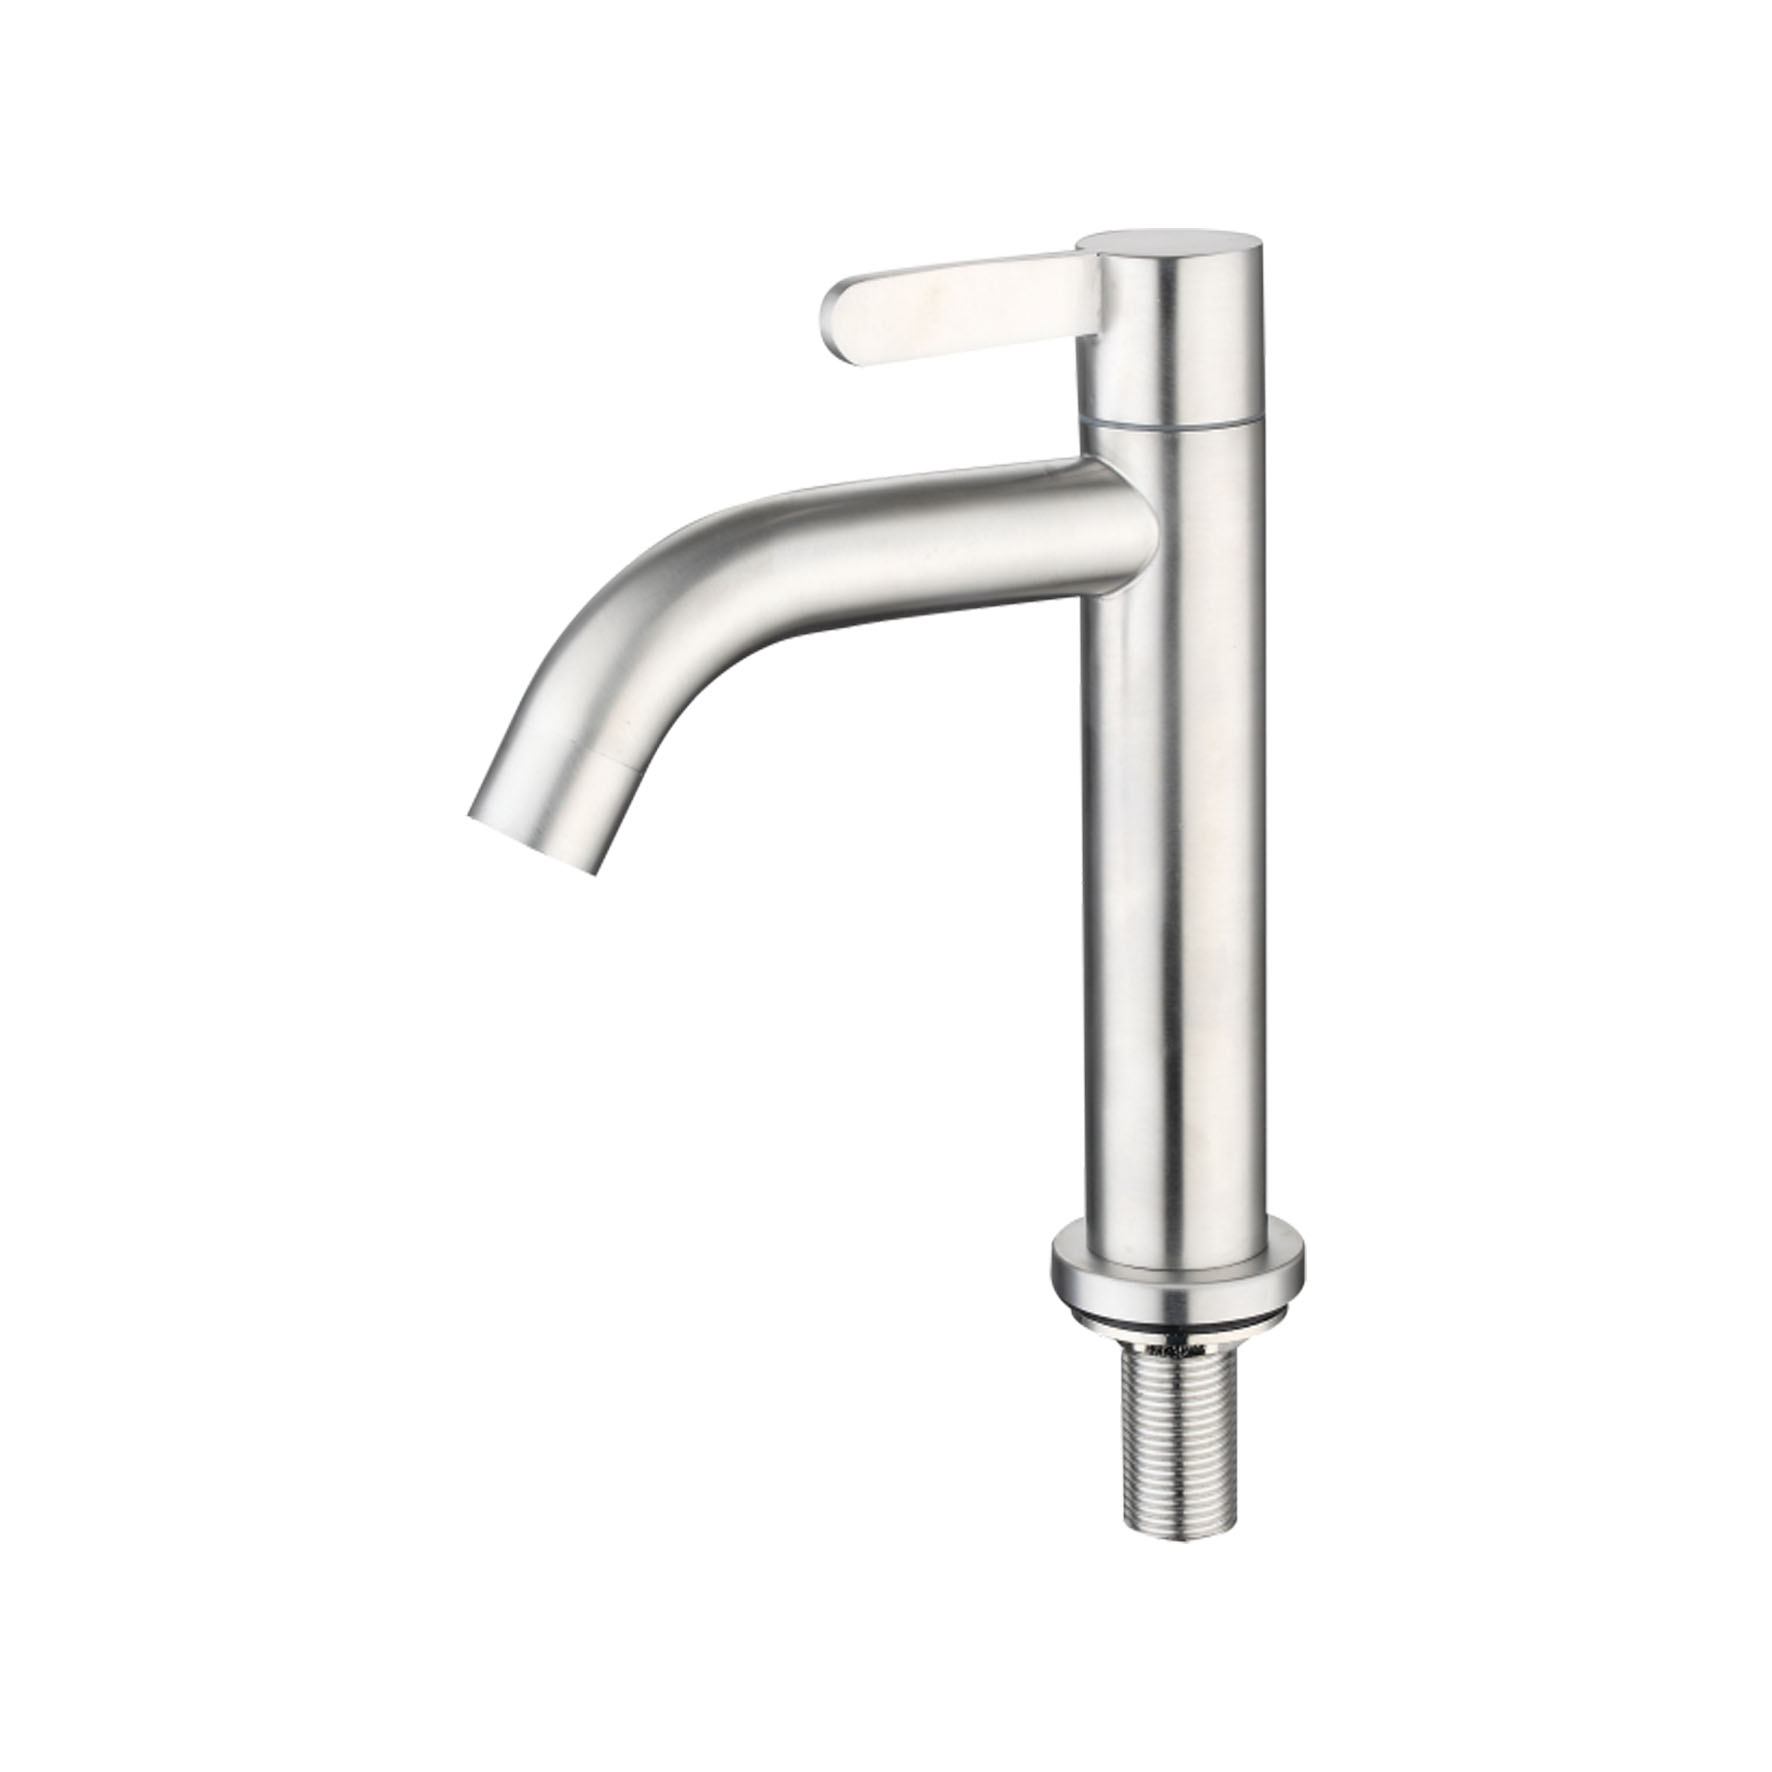 Rubine – Stainless Steel Basin Cold Tap – ALTA-P91325M-SS